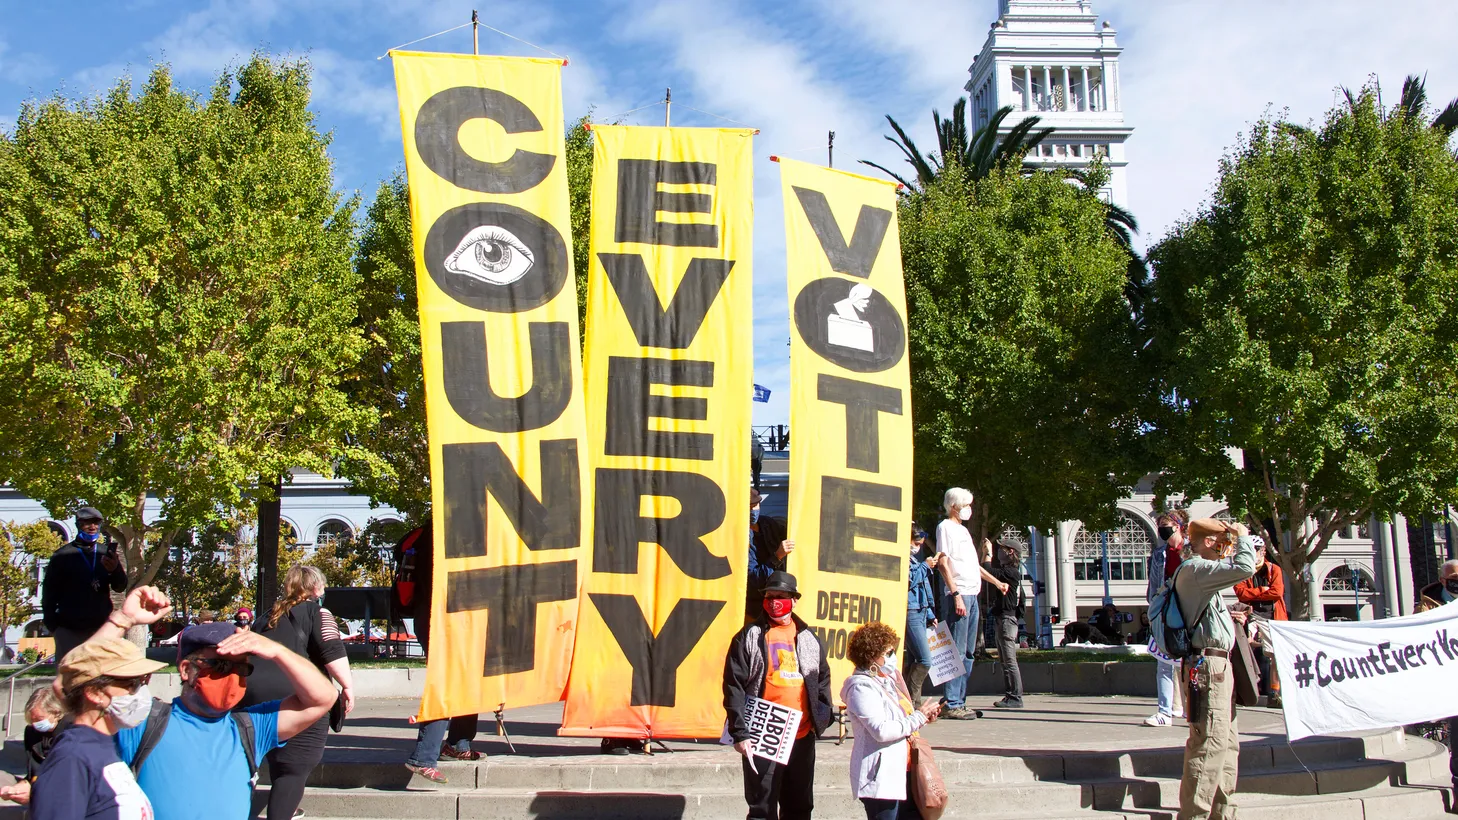 Banners say “count every vote” in San Francisco, November 2020.